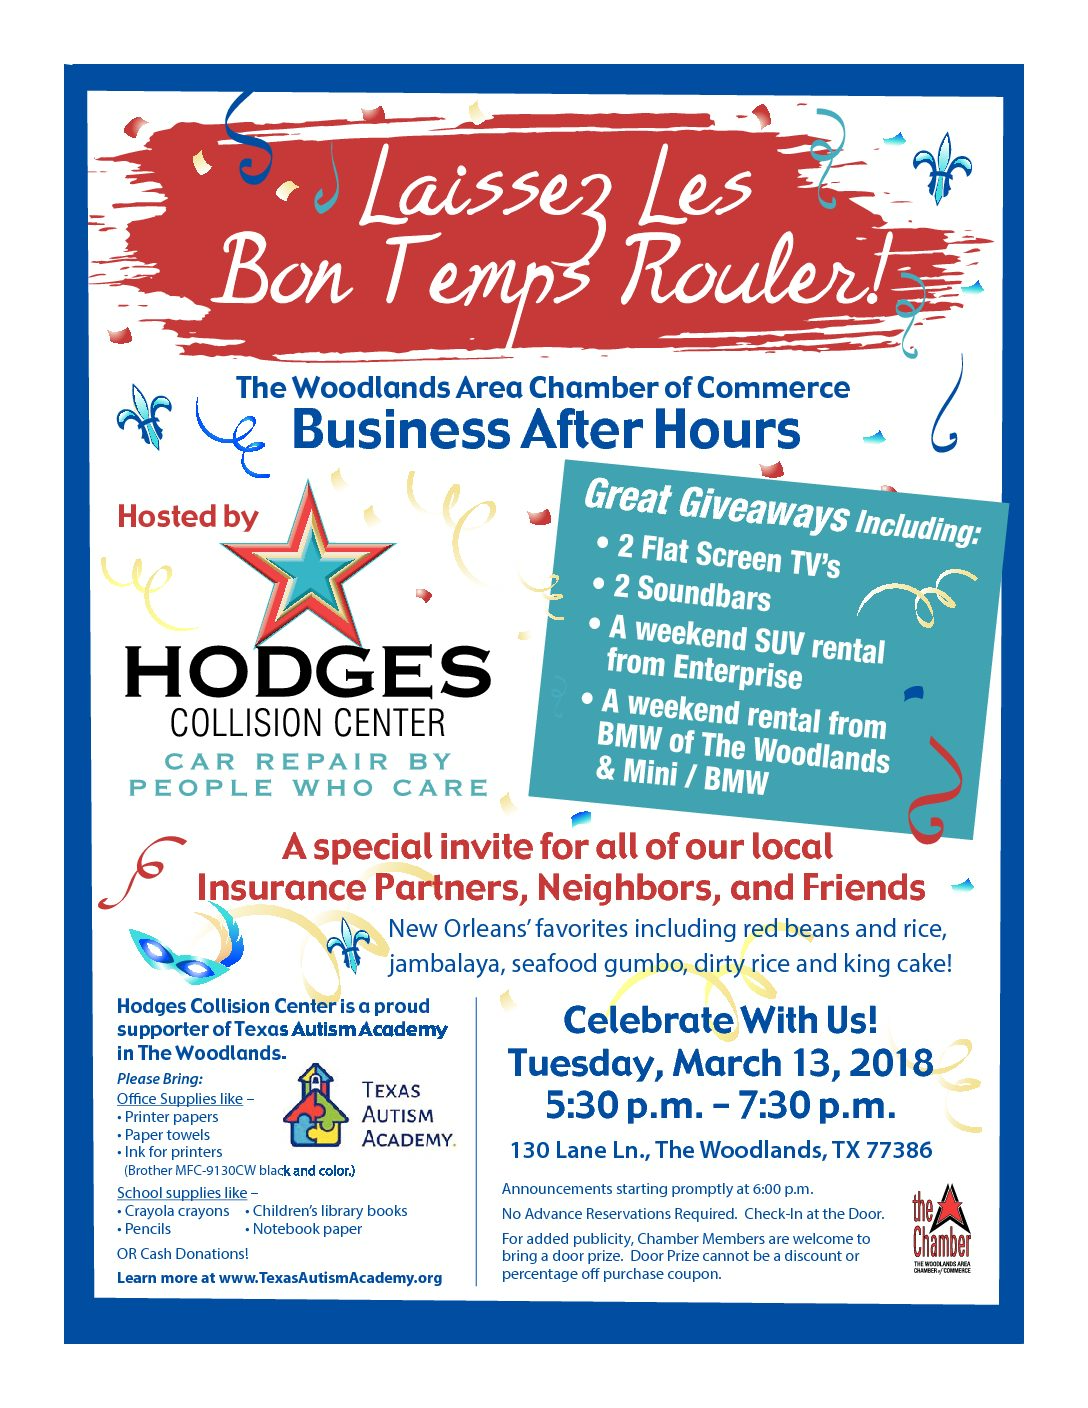 HODGES Collision Center The Woodlands Chamber Business After Hours Event